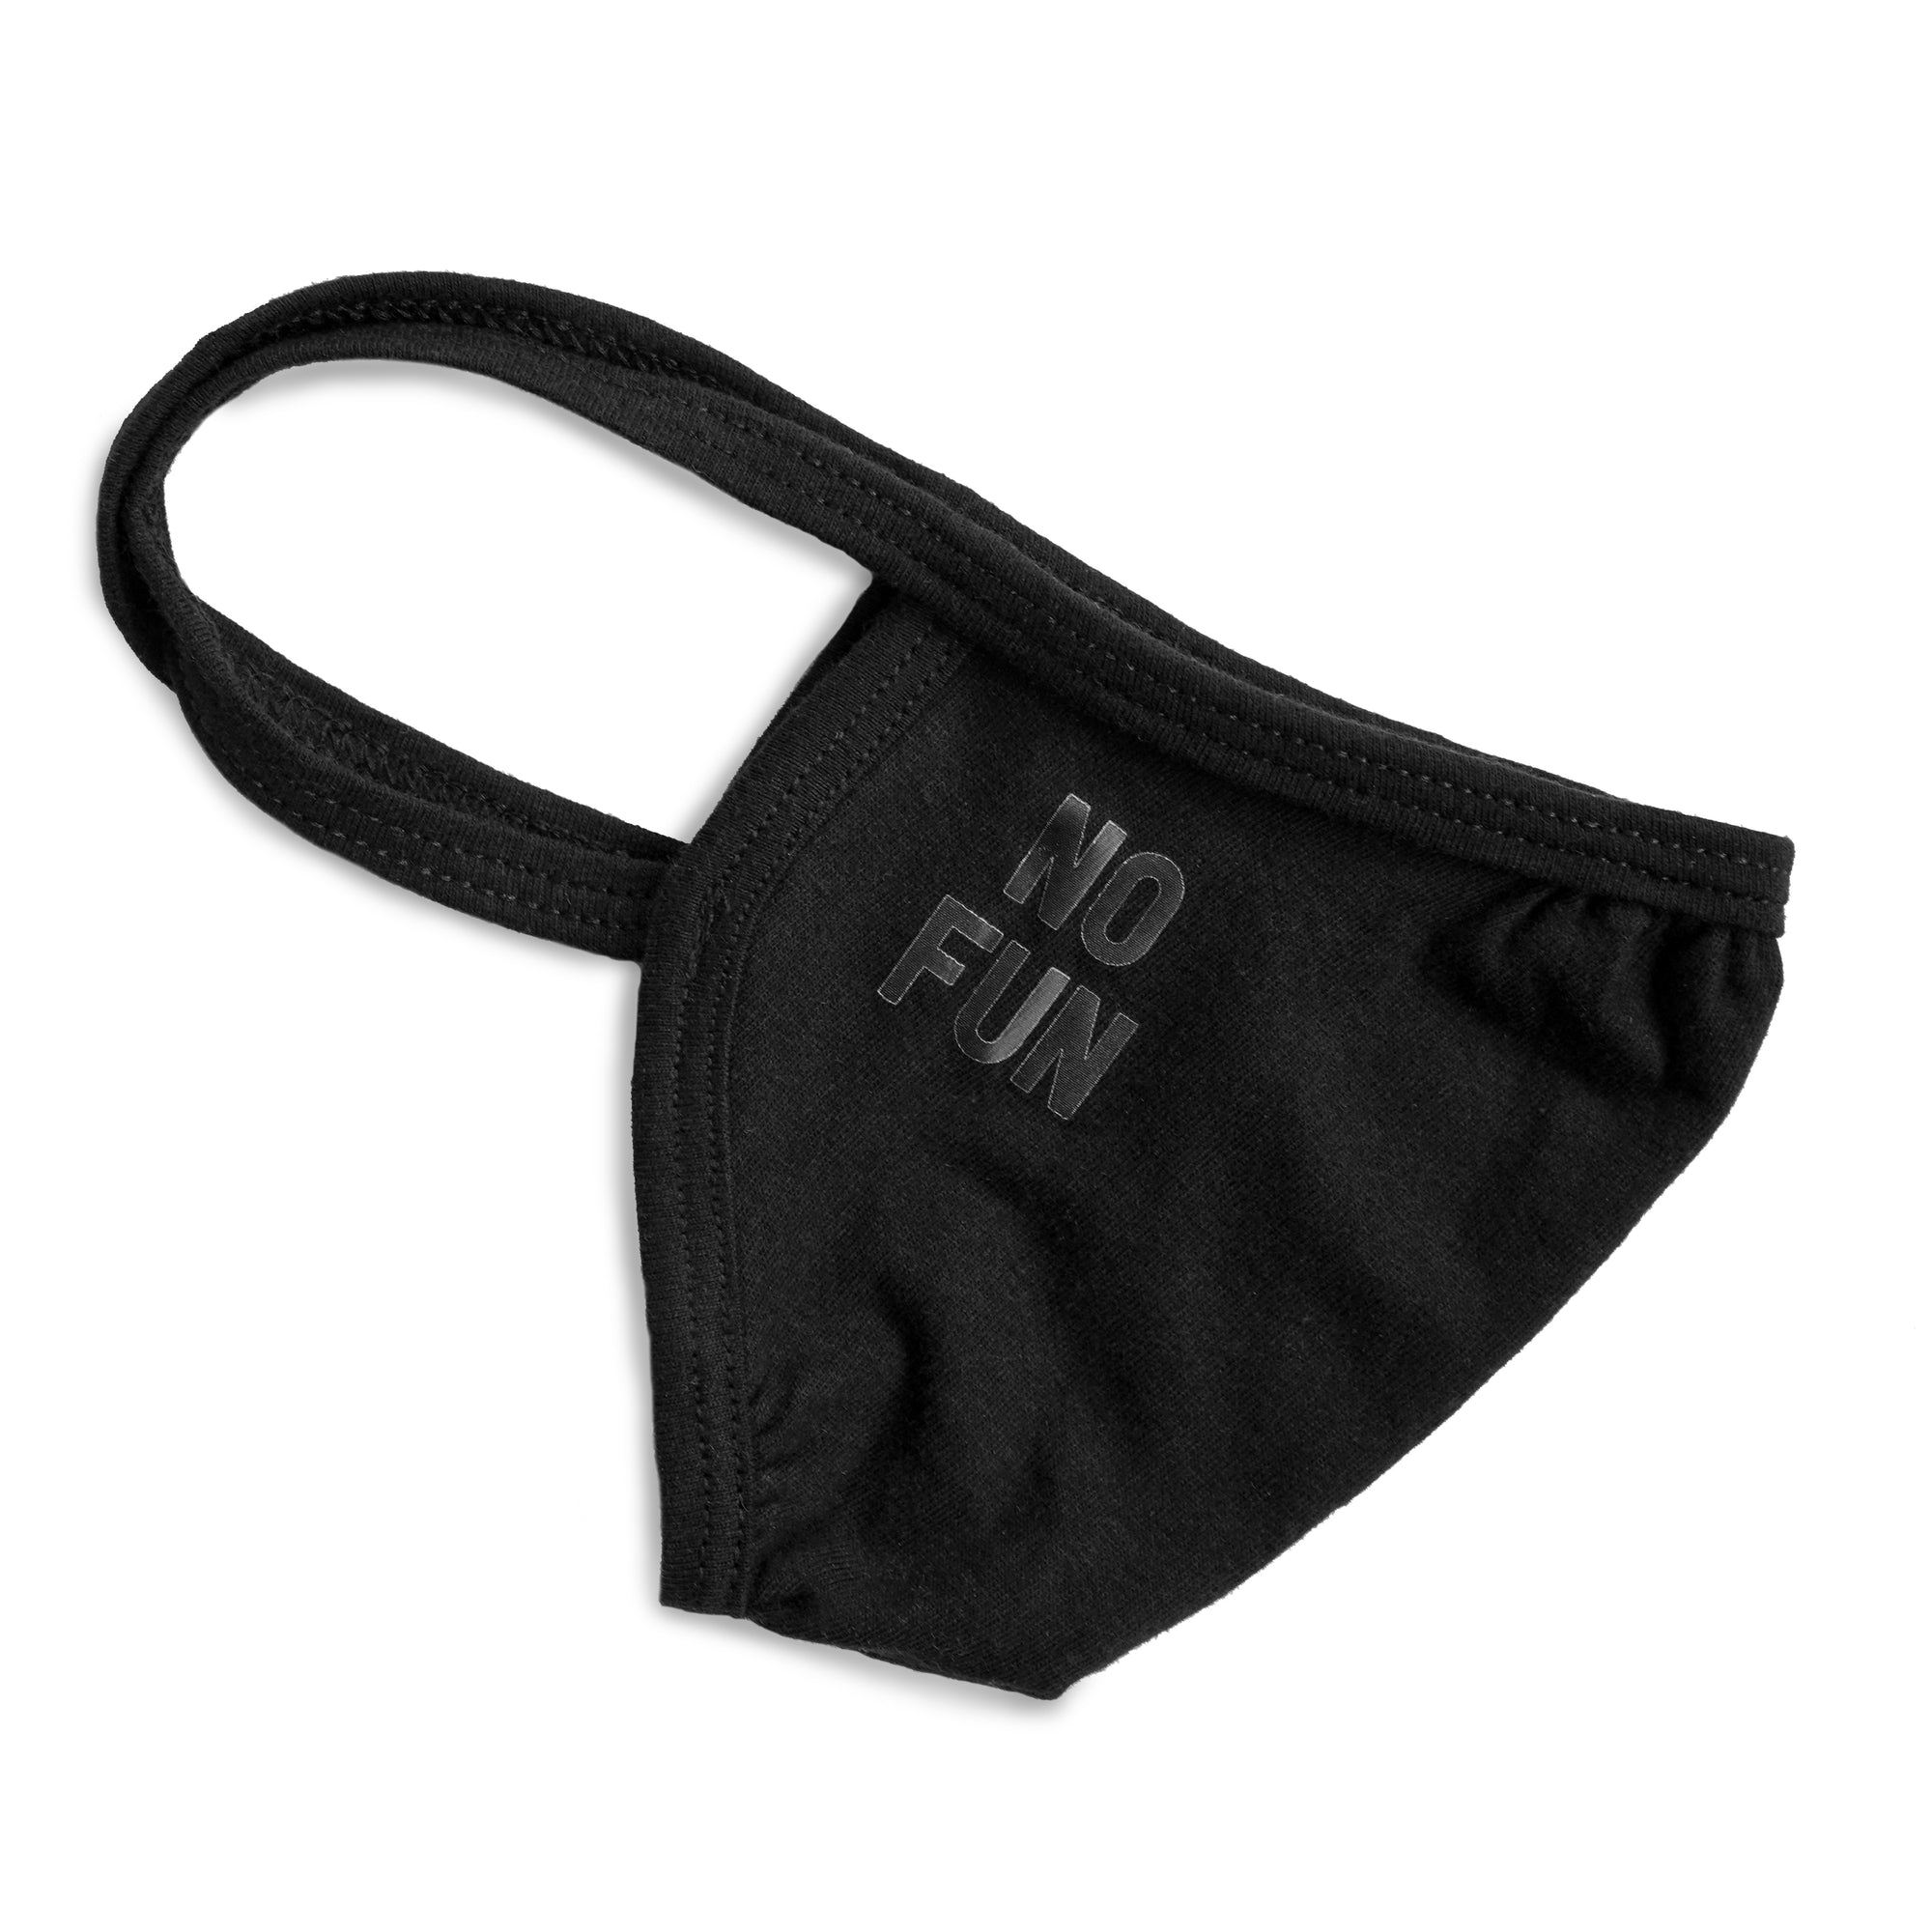 Photo of the "No Fun®" Face Mask.  The product is black and is photographed against a white background.  The mask features a small "No Fun®" logo in black near the ear strap.